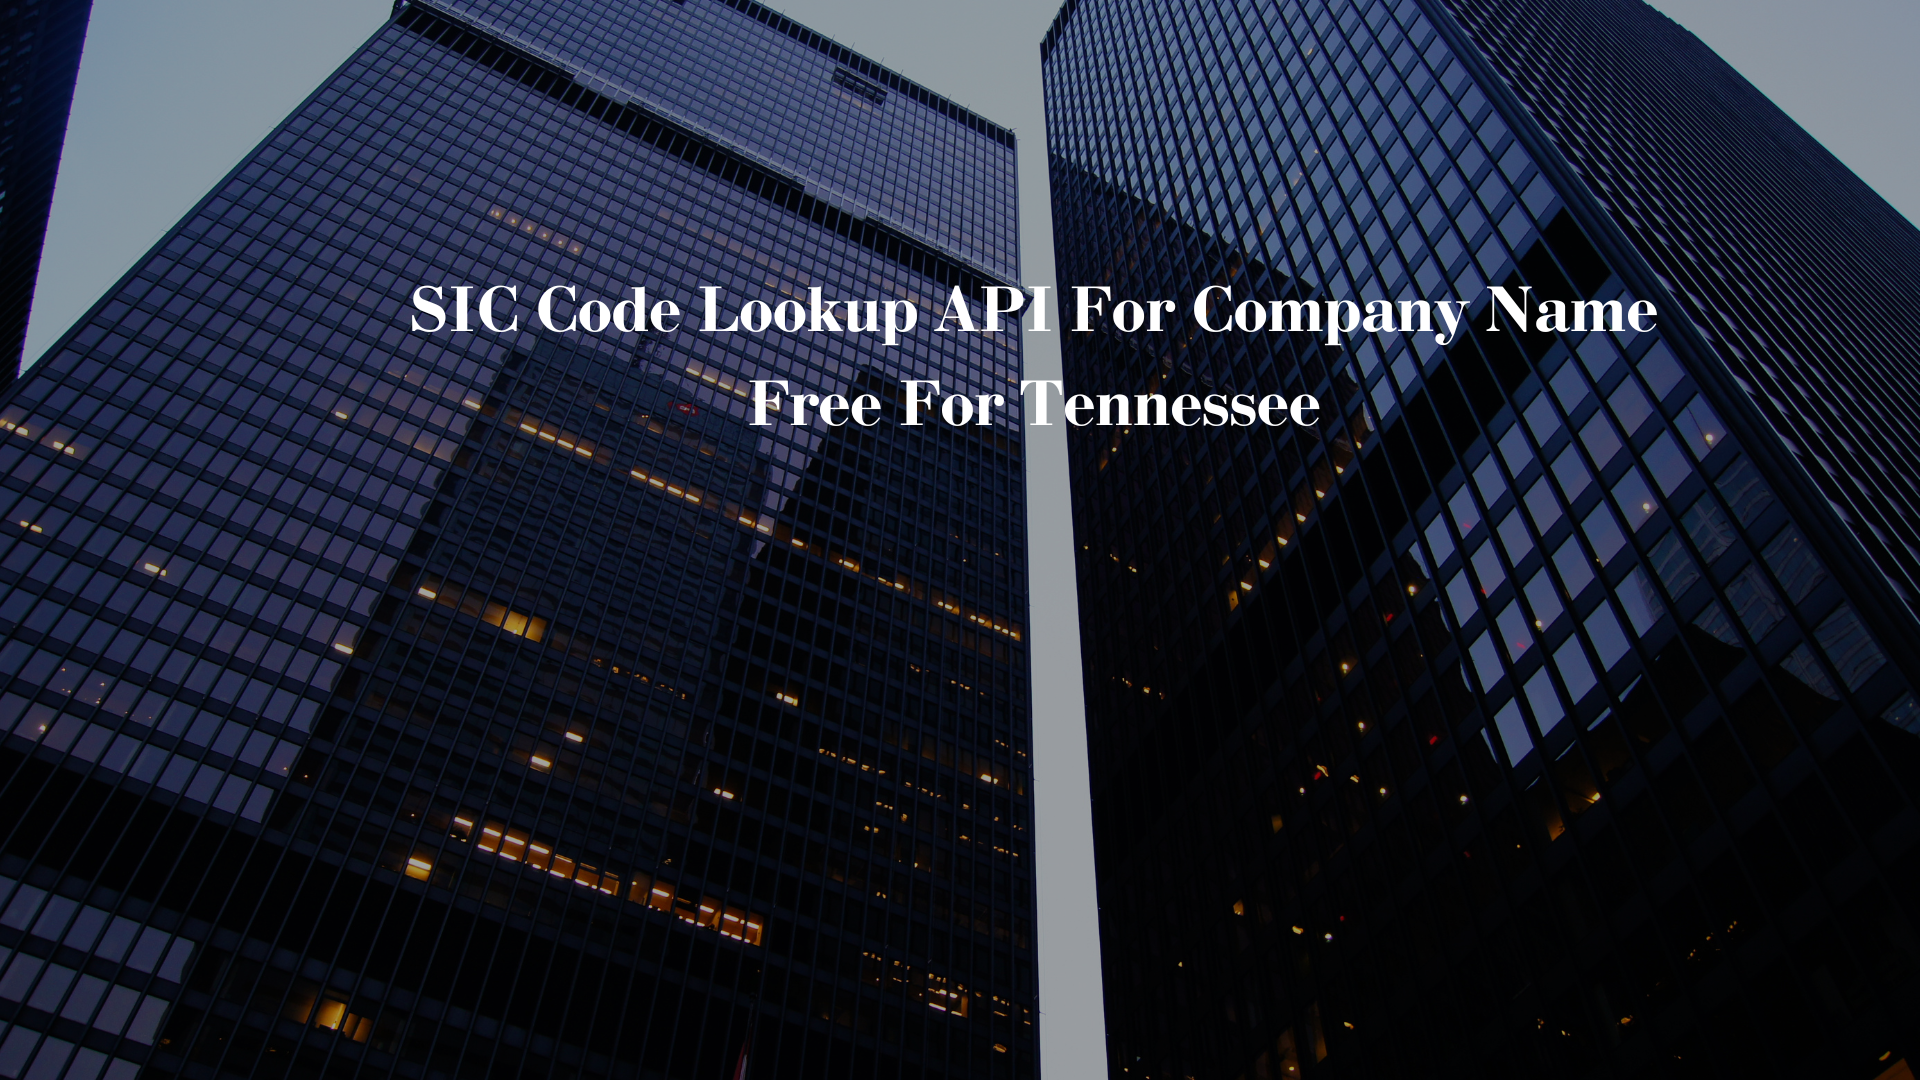 SIC Code Lookup API For Company Name Free For Tennessee